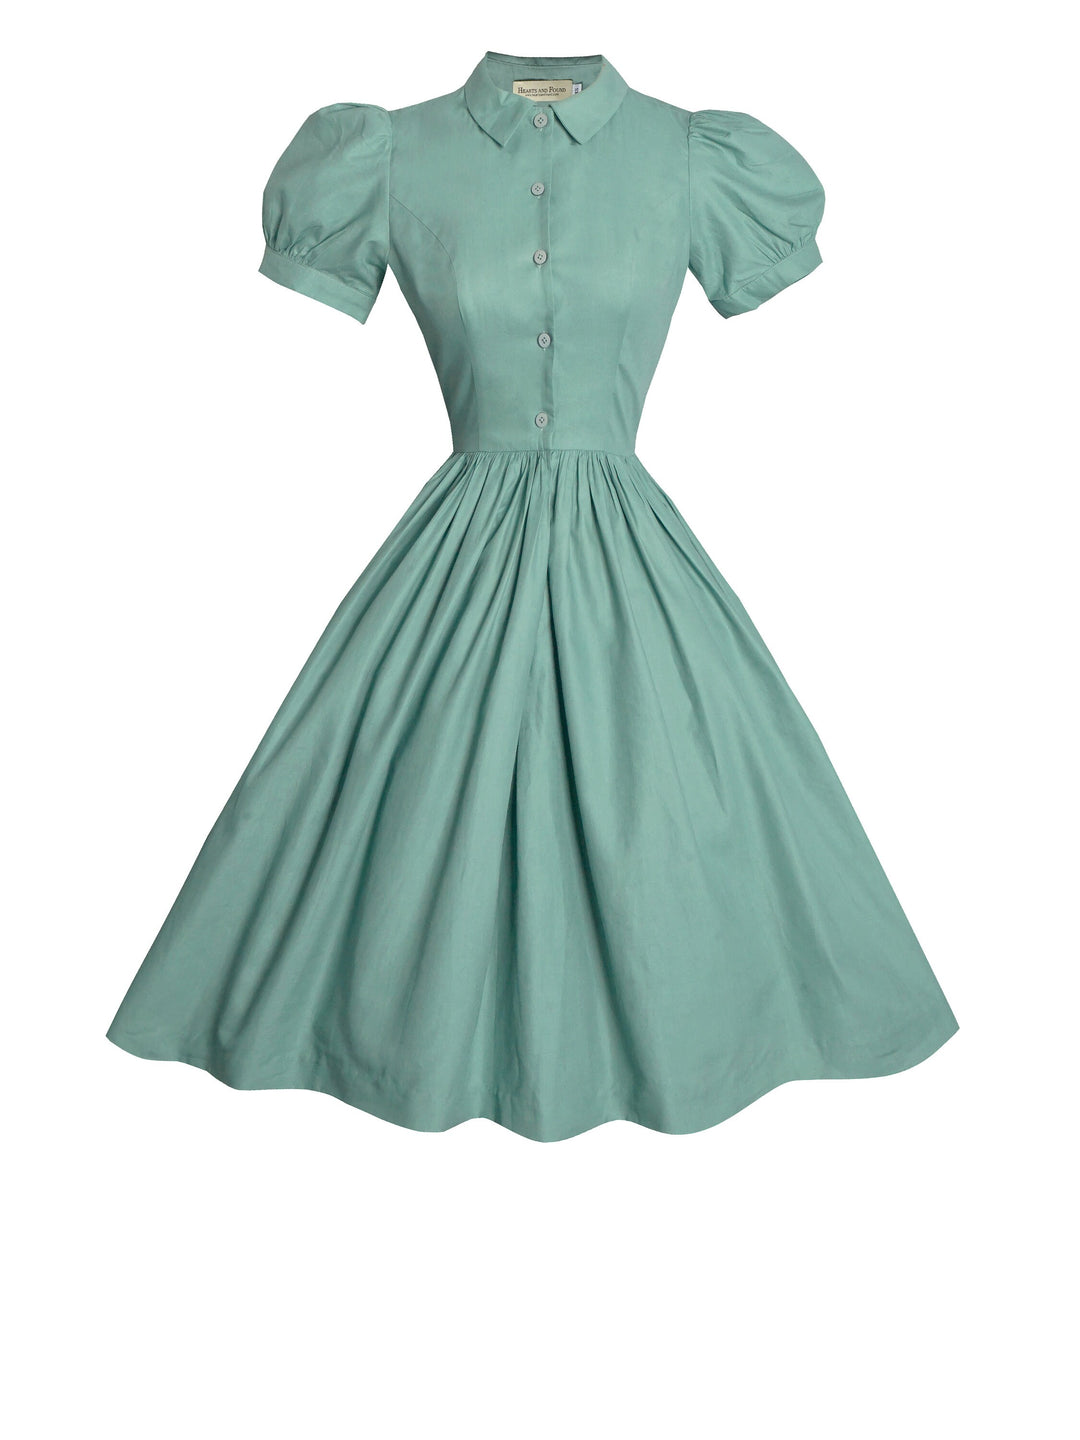 RTS - Size XS - Judy Dress in Jade Green Cotton